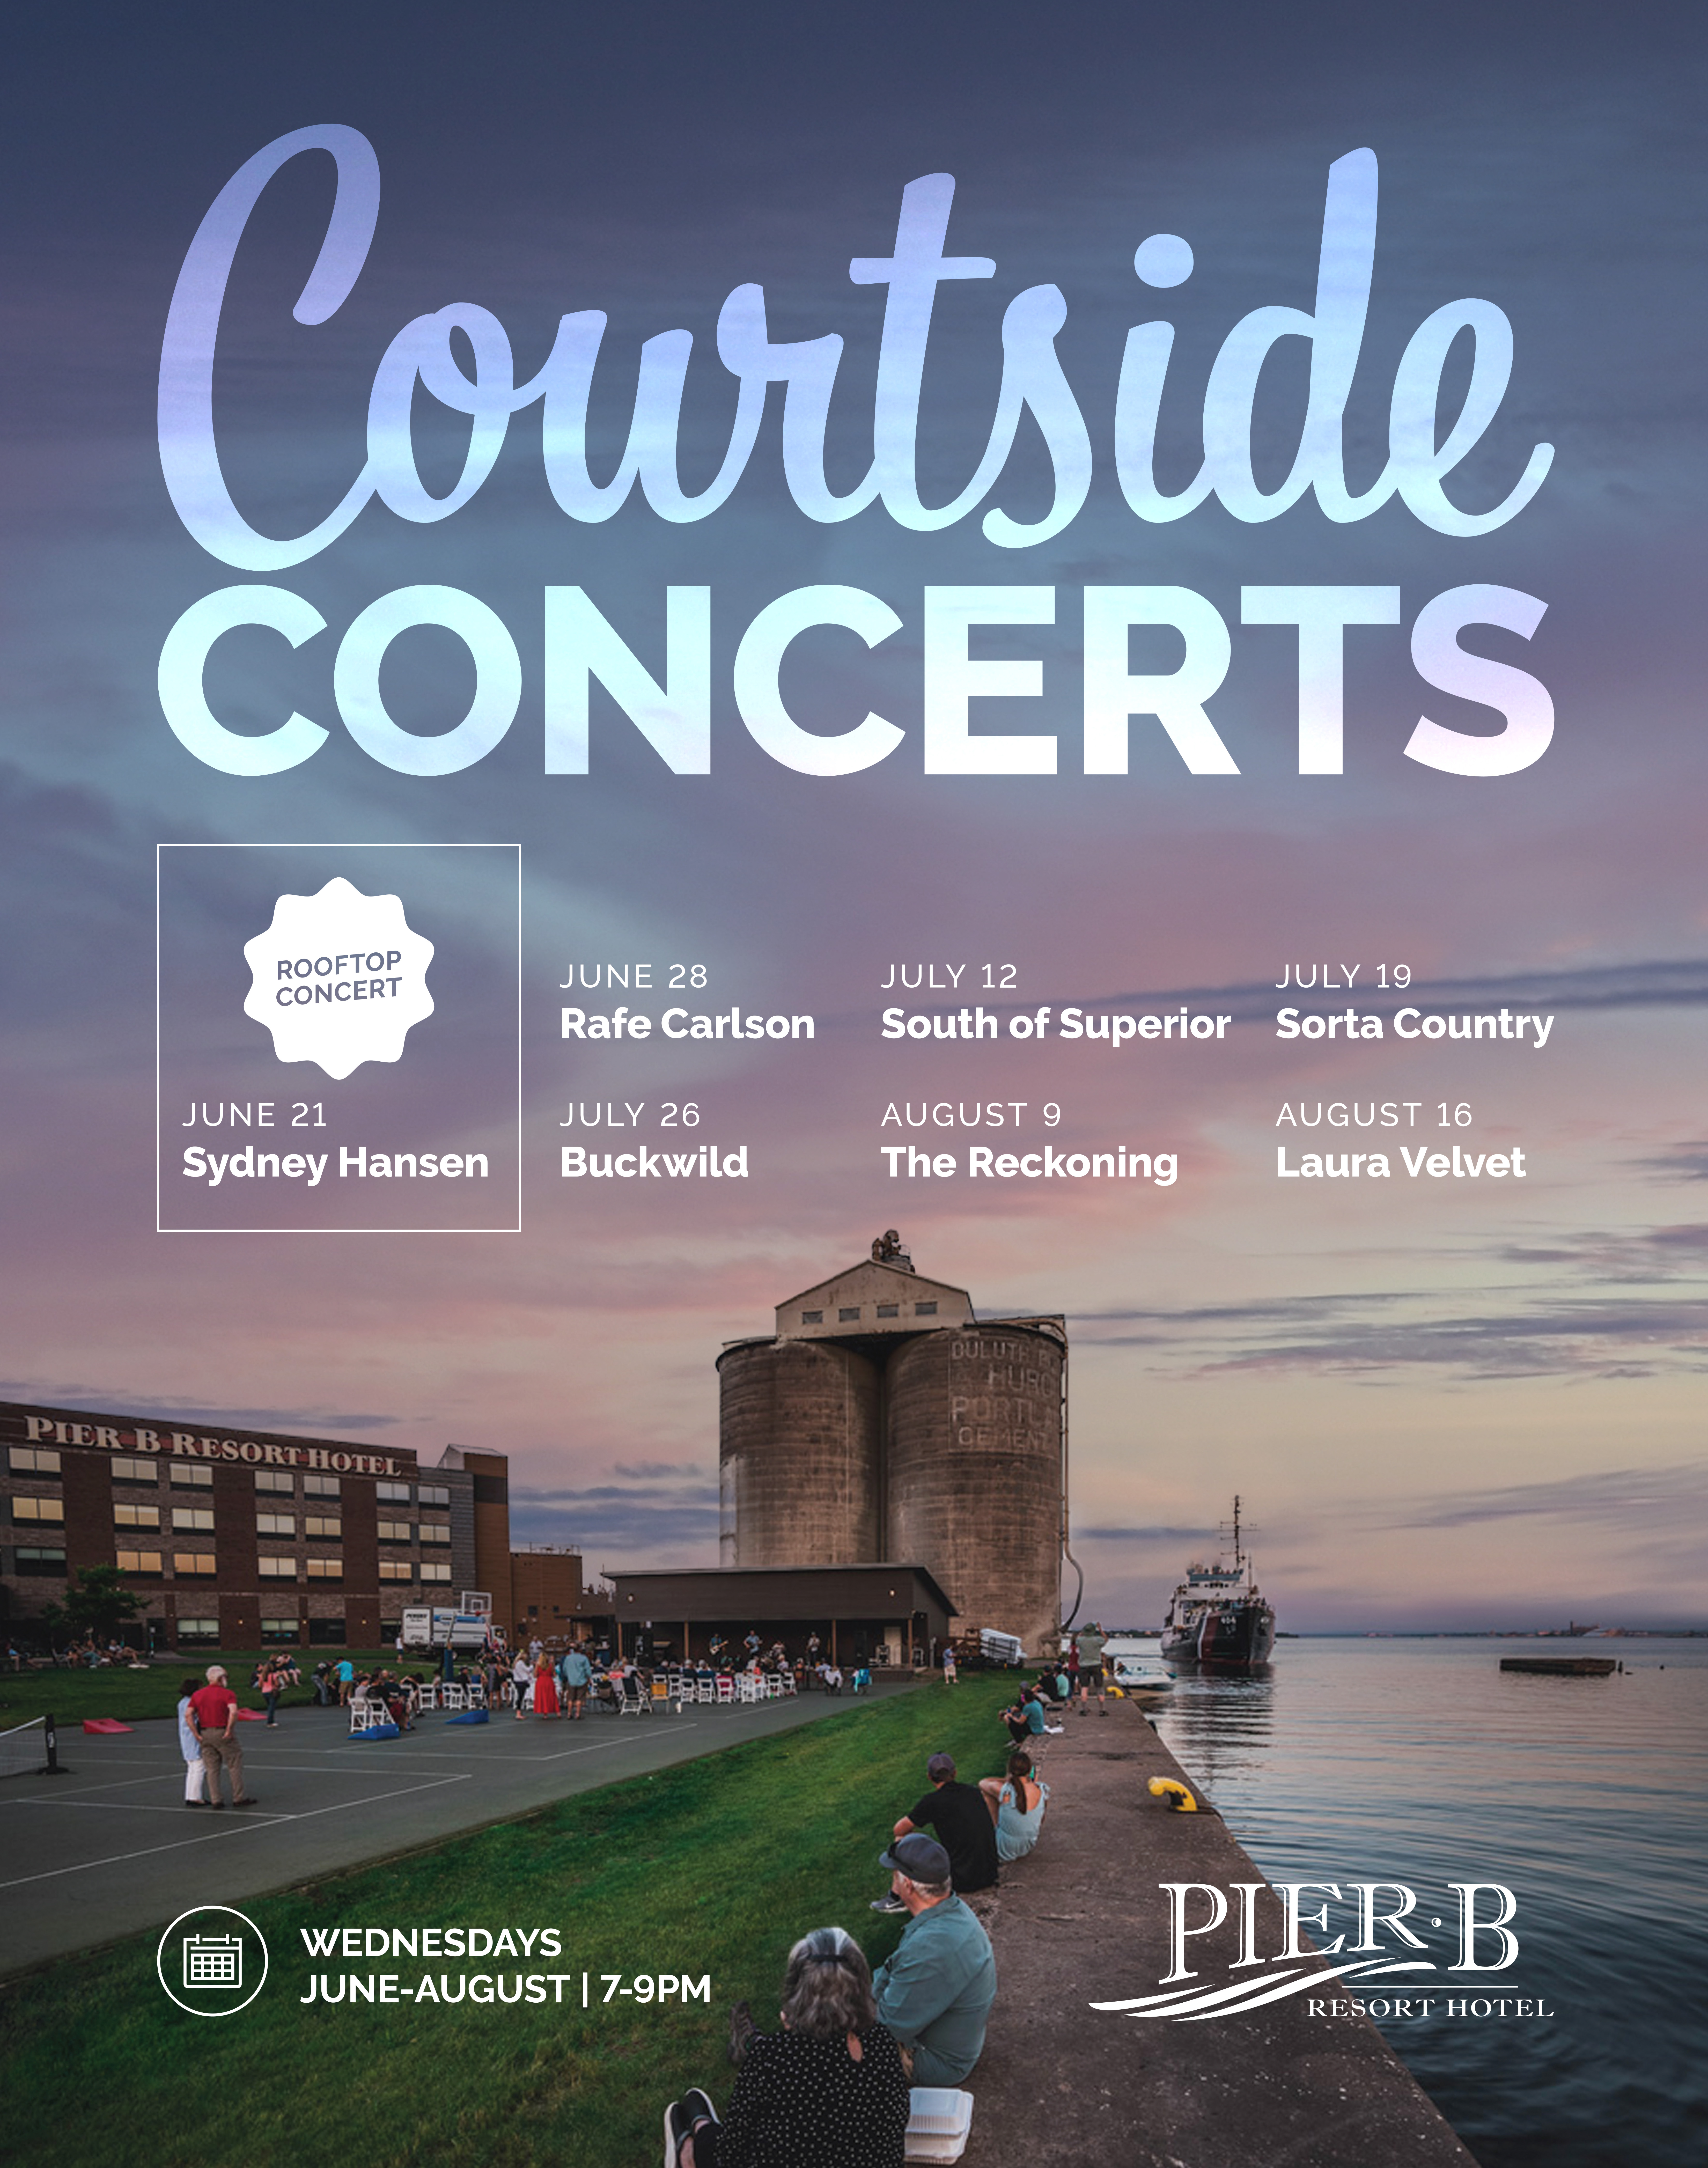 Courtside Concert at Pier B